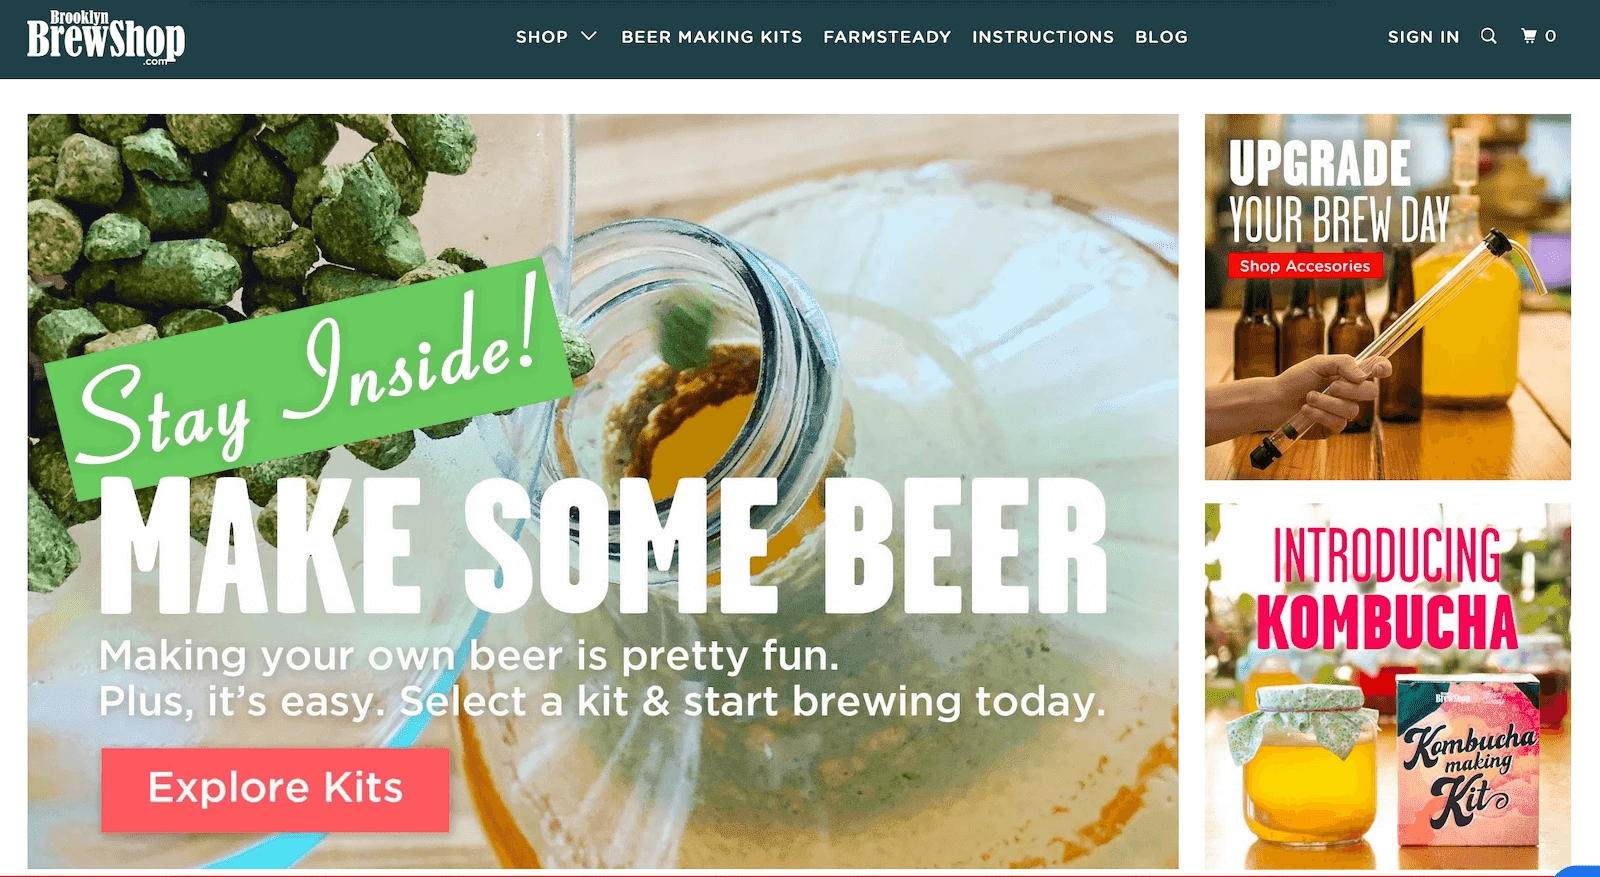 Brooklyn Brew Shop’s homepage with beer kits and new products for hobbyists.